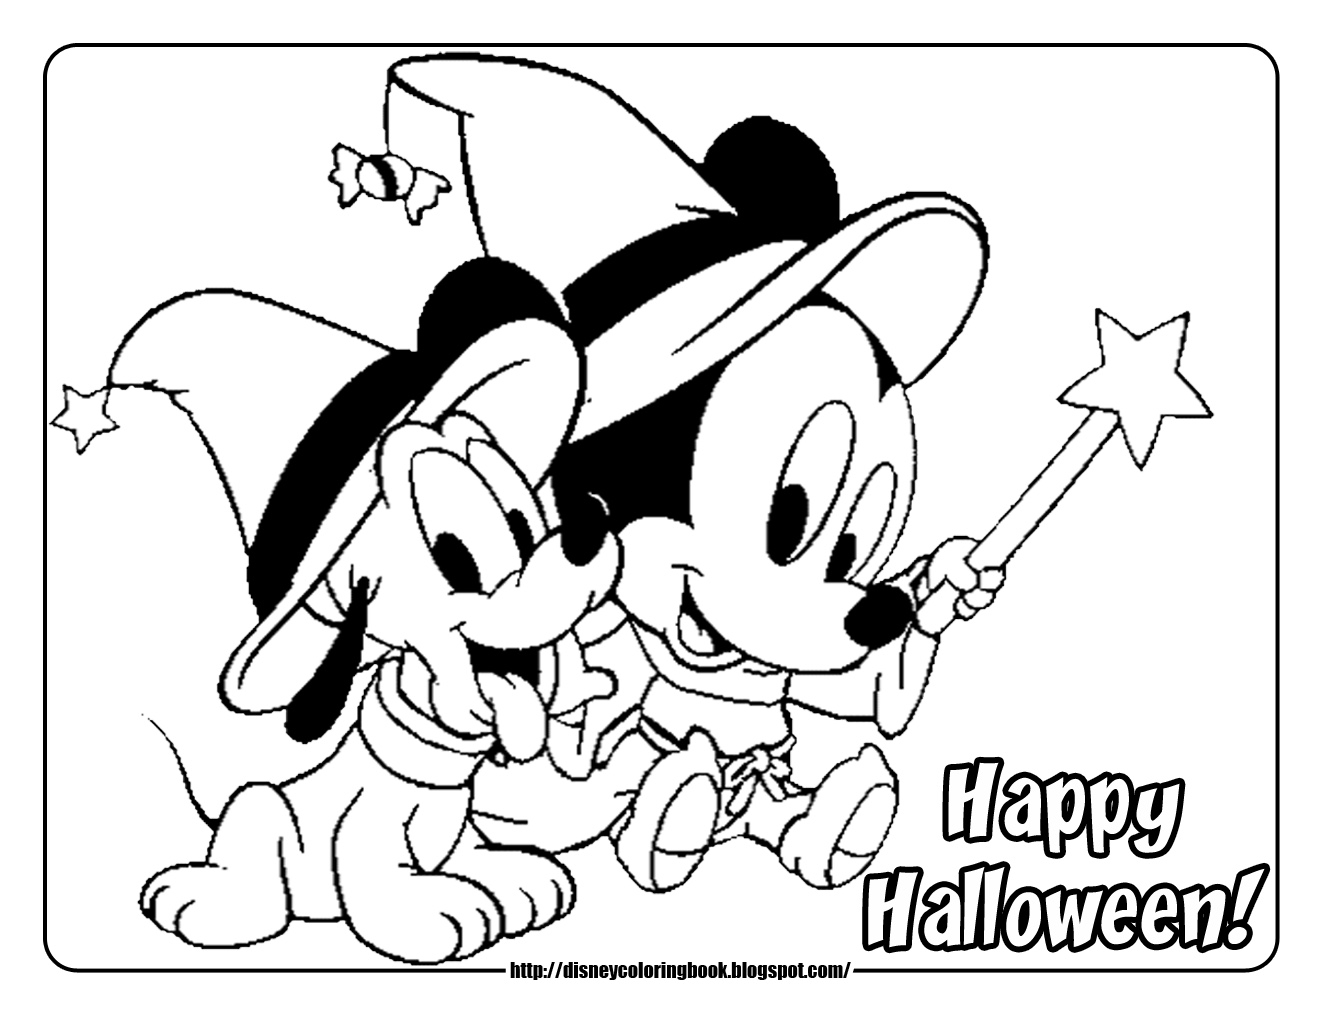  Happy Halloween Disney coloring pages